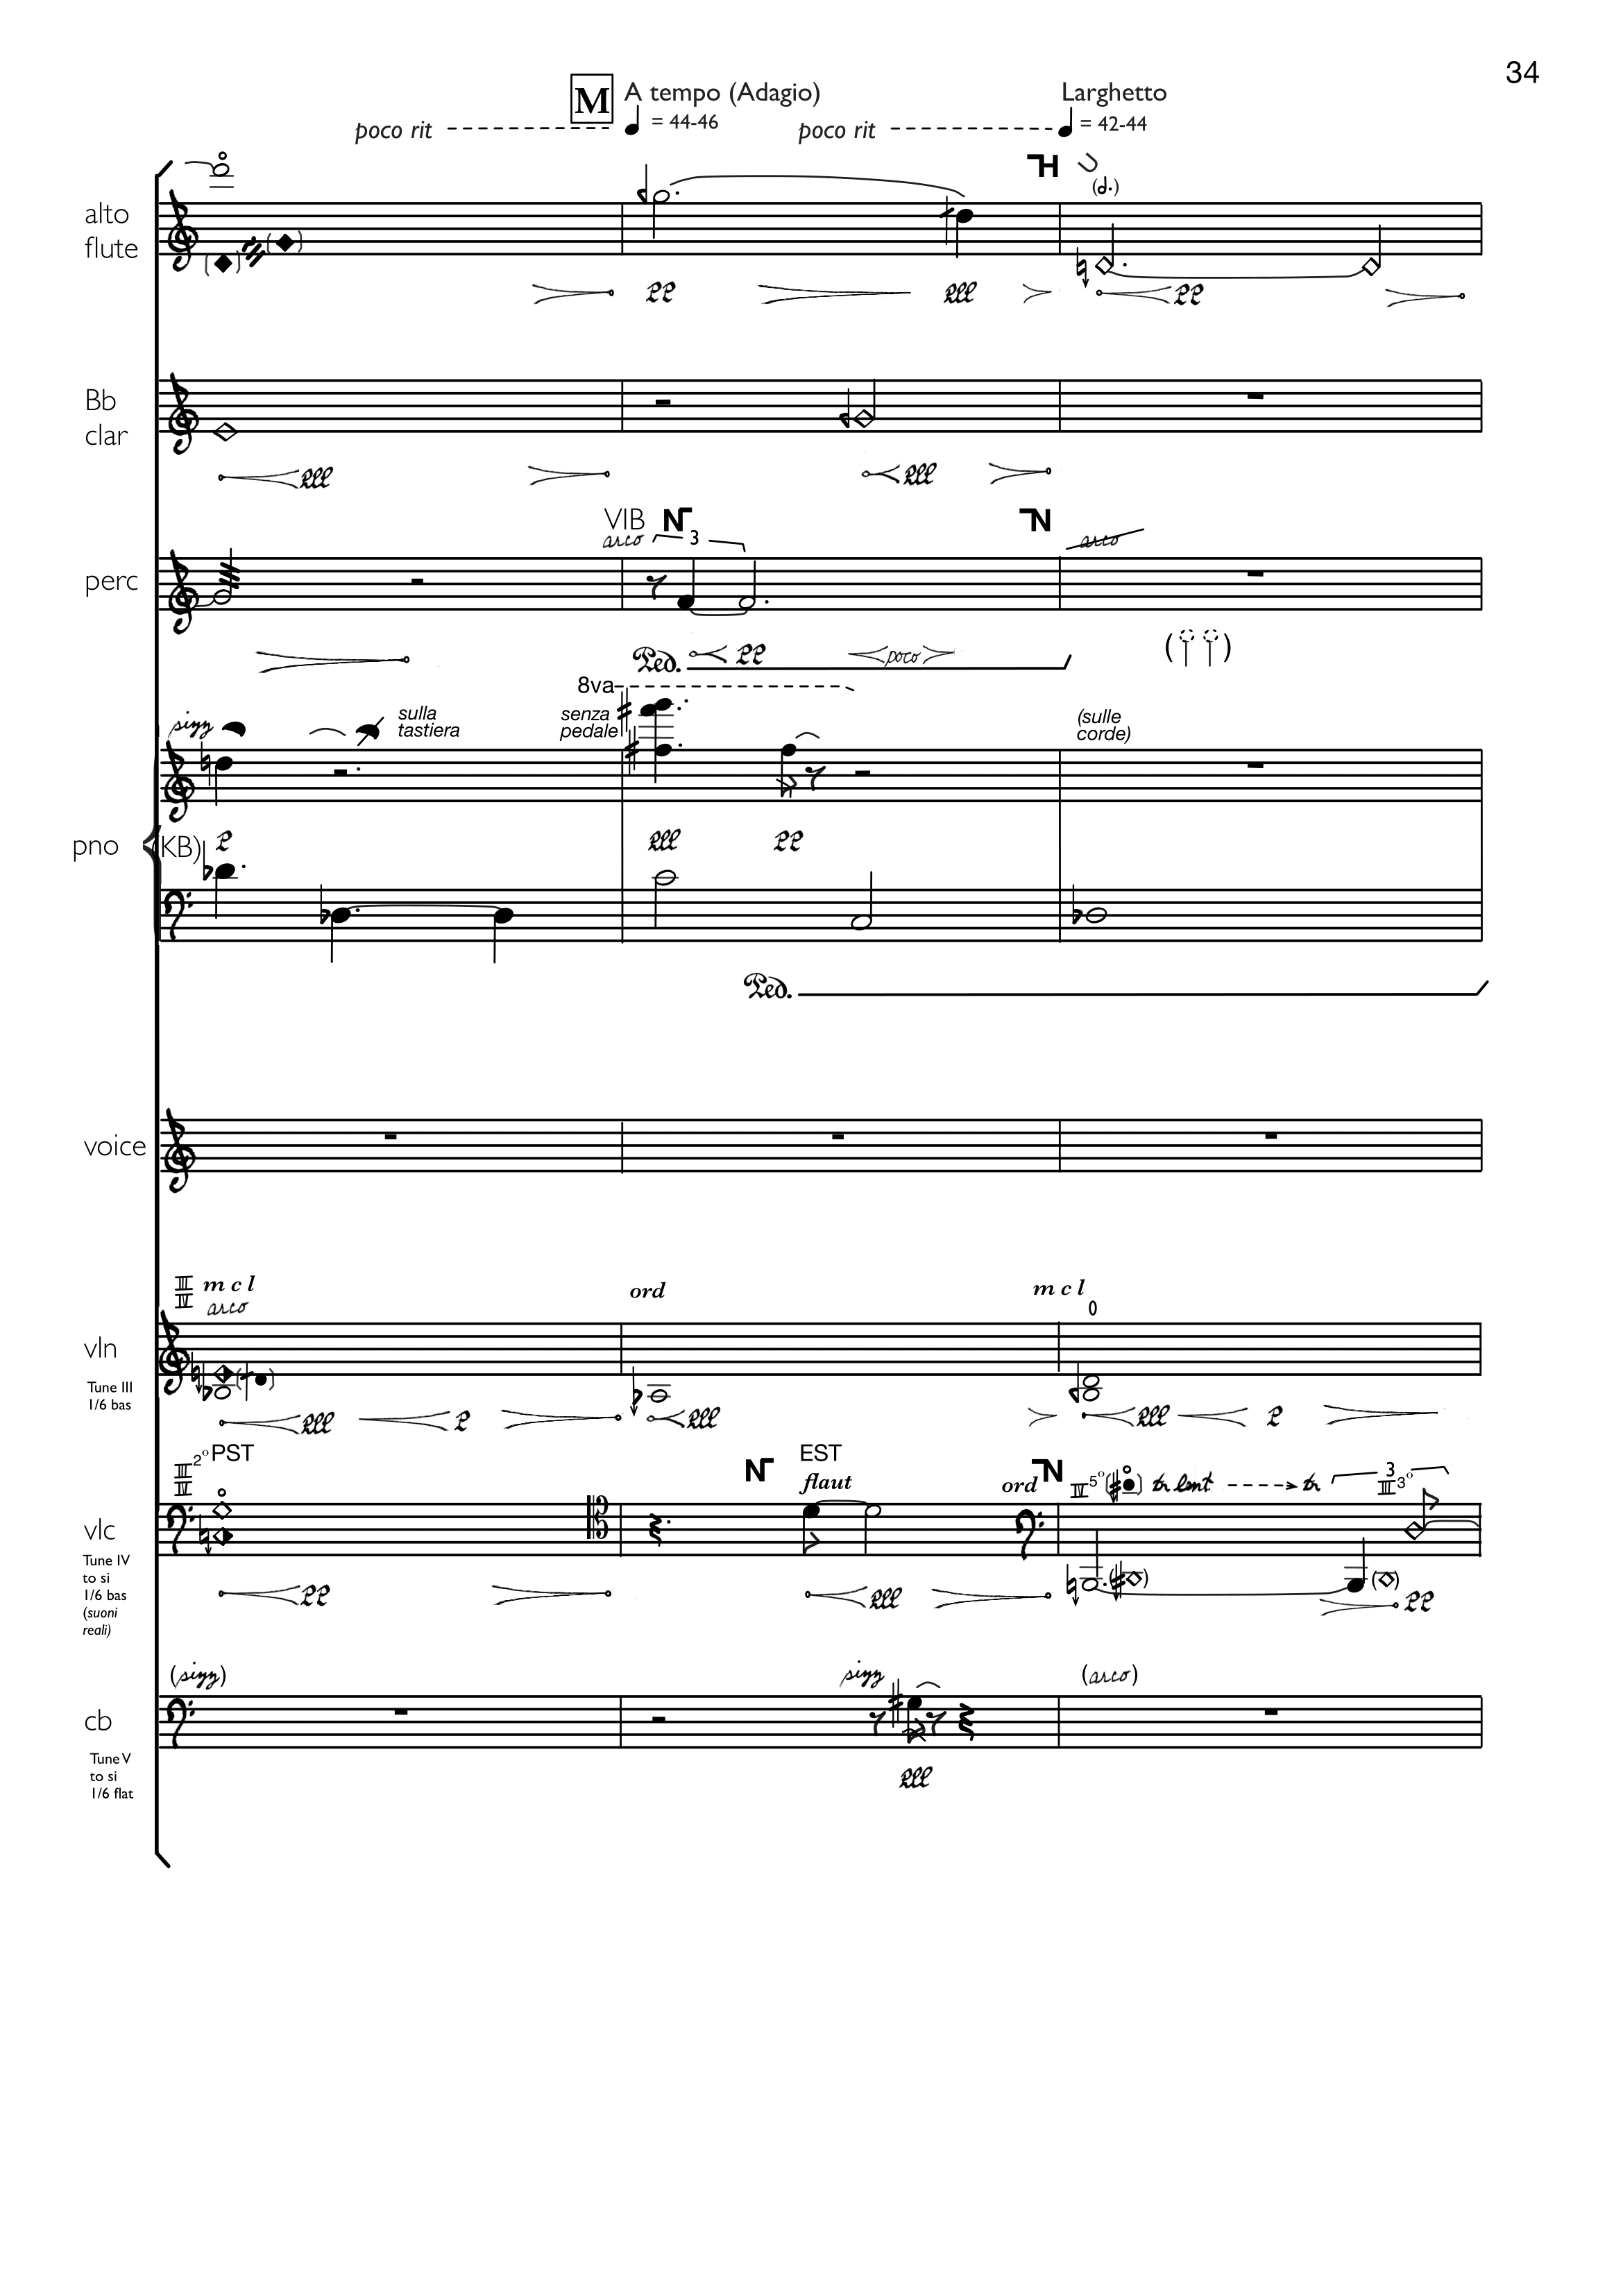 _AdasSong-score-2021version-34.png